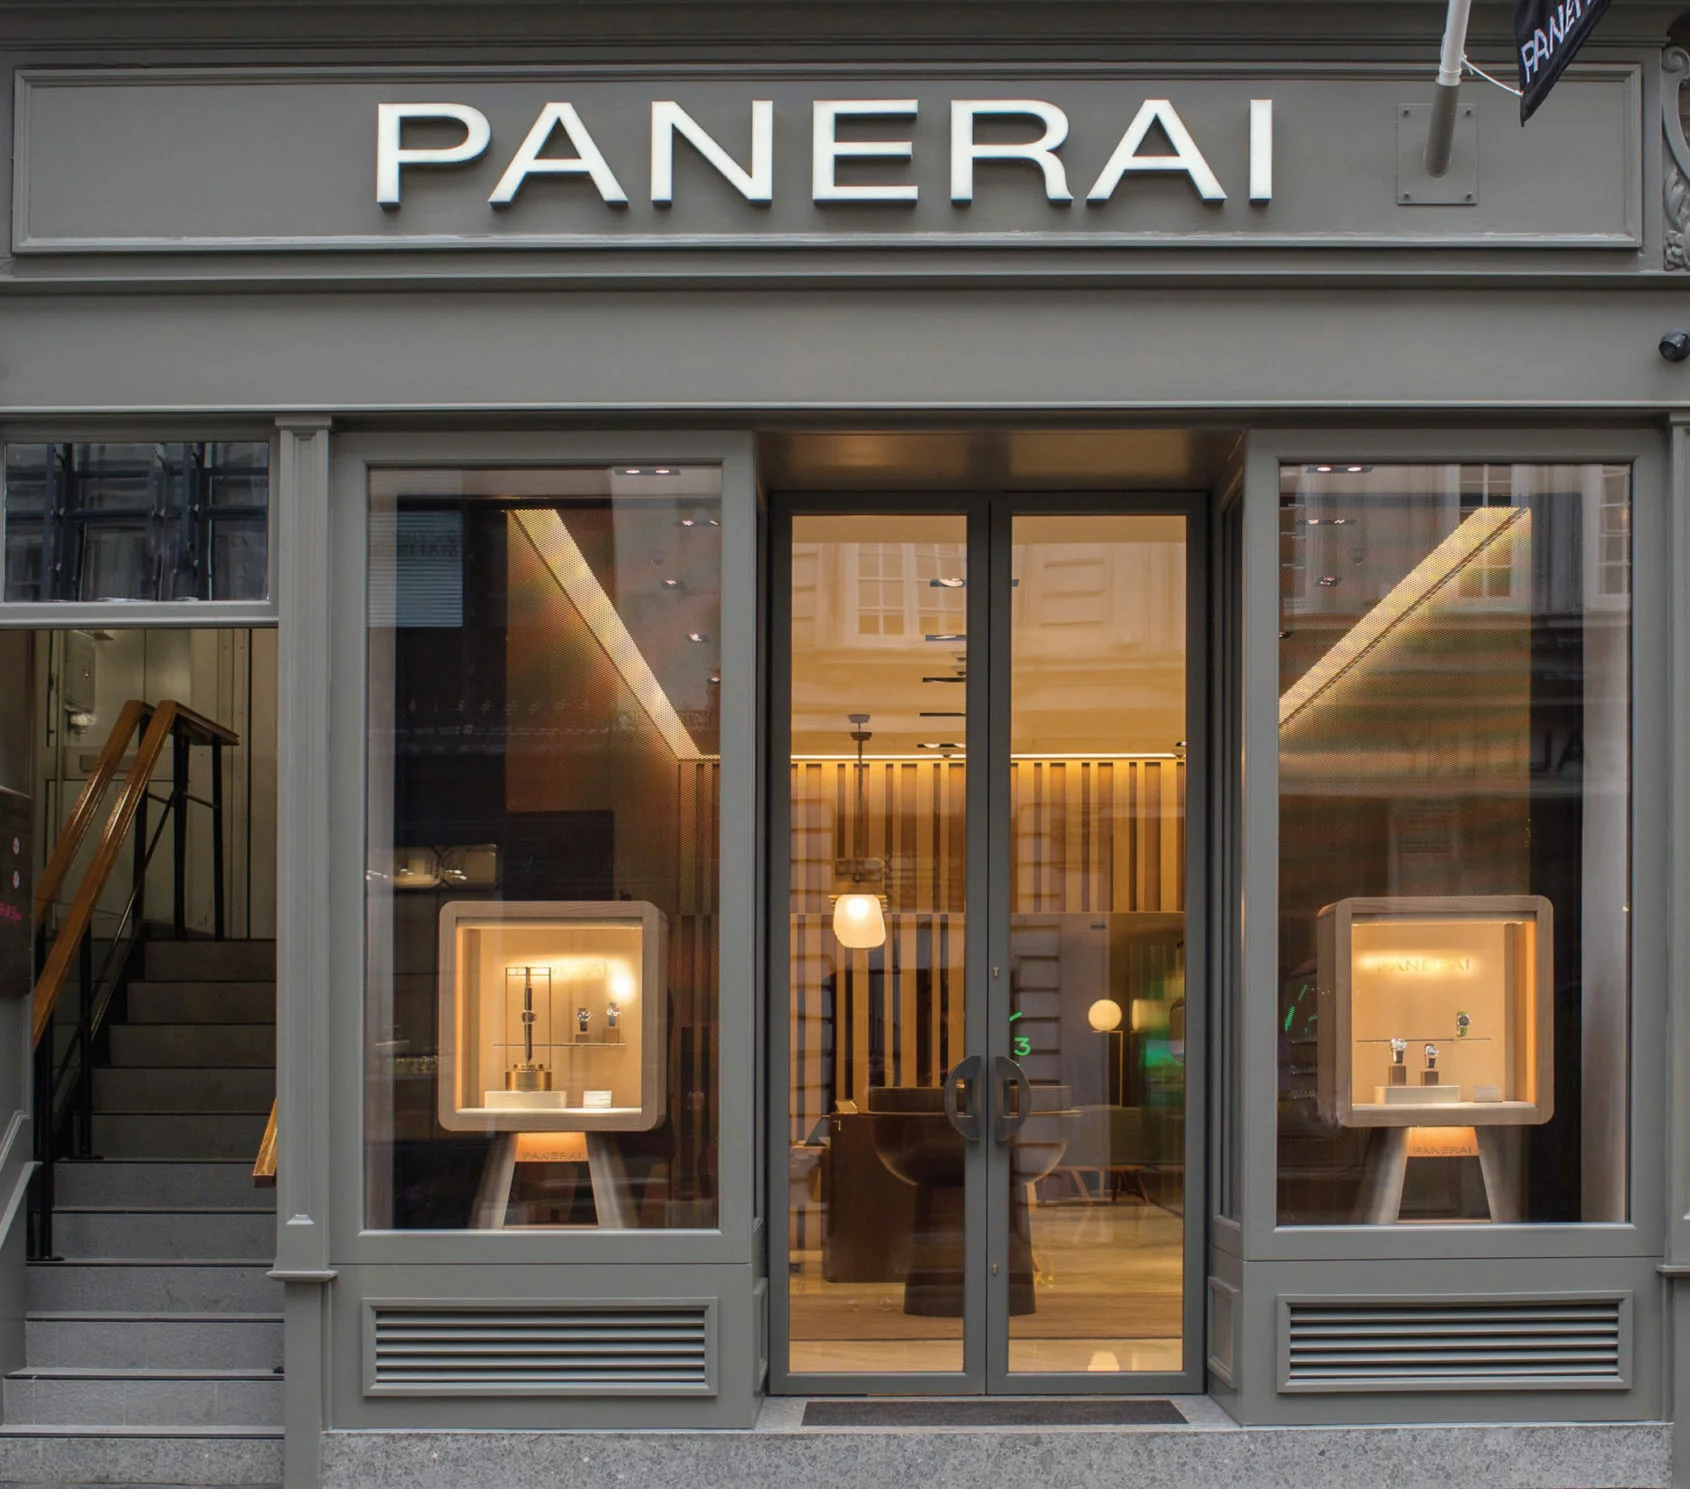 20 Luxury Jewellers In Bond Street To Check Out - London